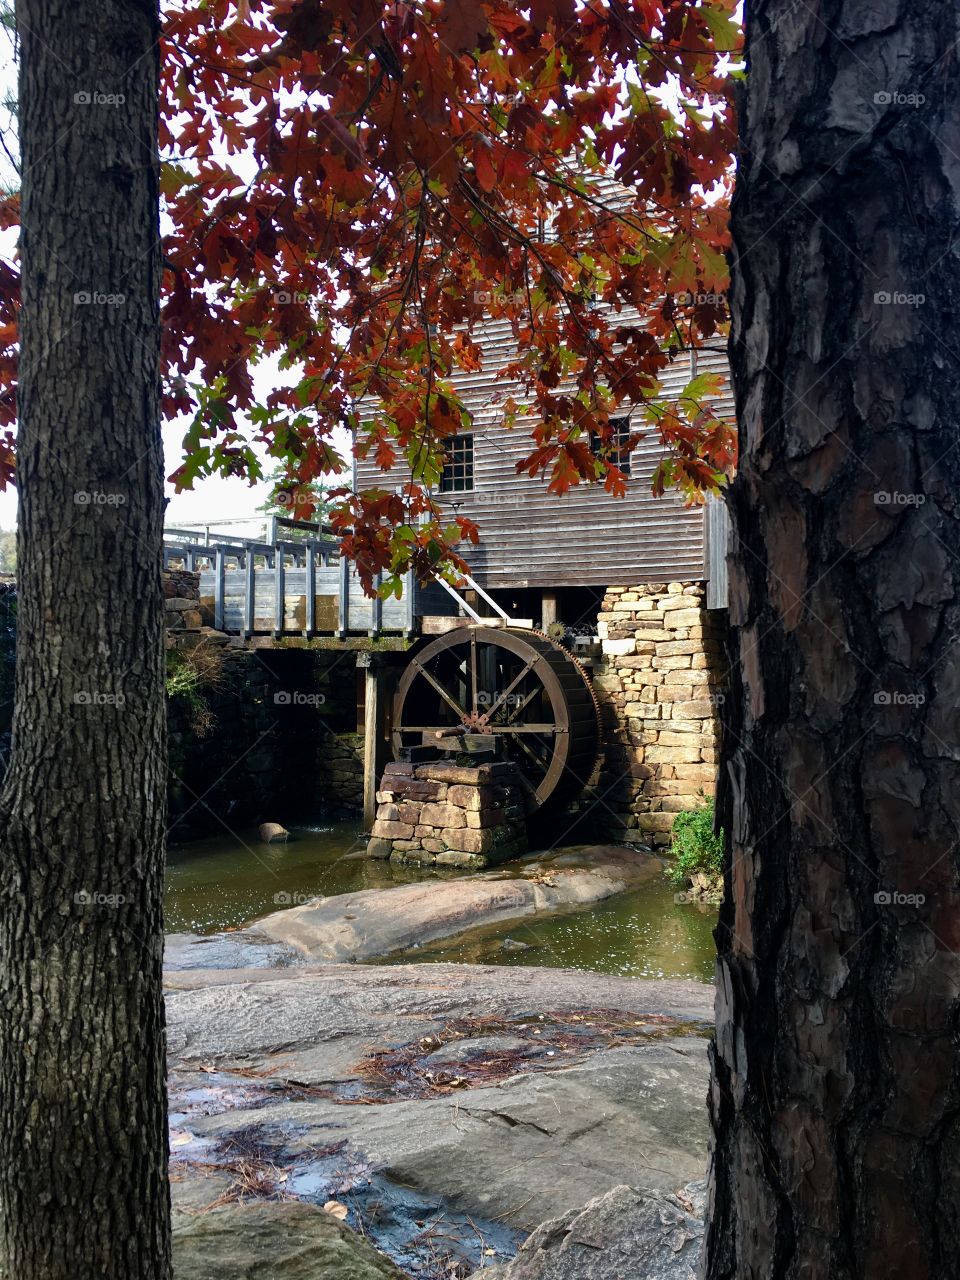 Historic Yates Mill Park in the fall